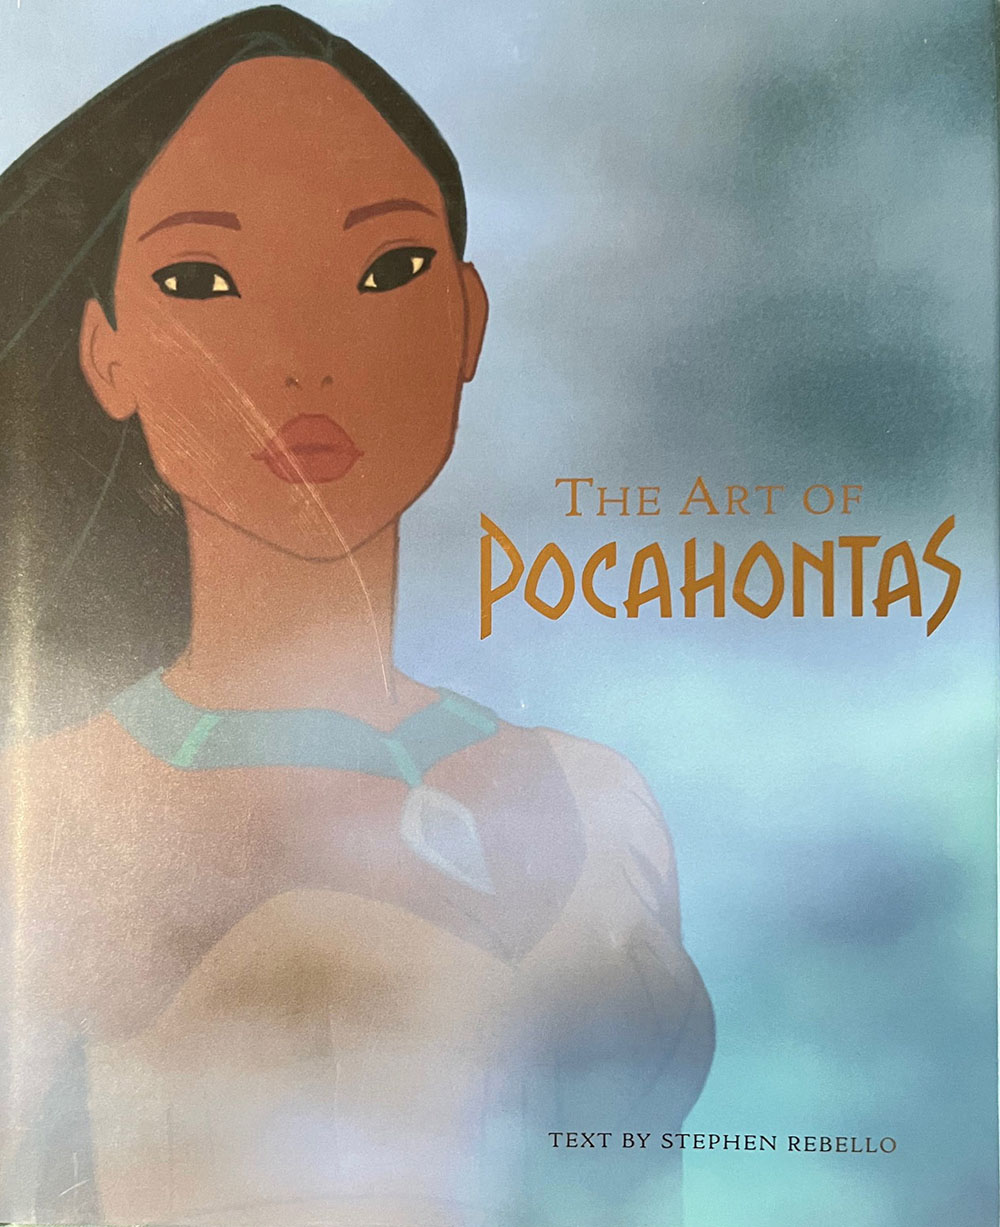 The Art Of Pocahontas at The Book Palace